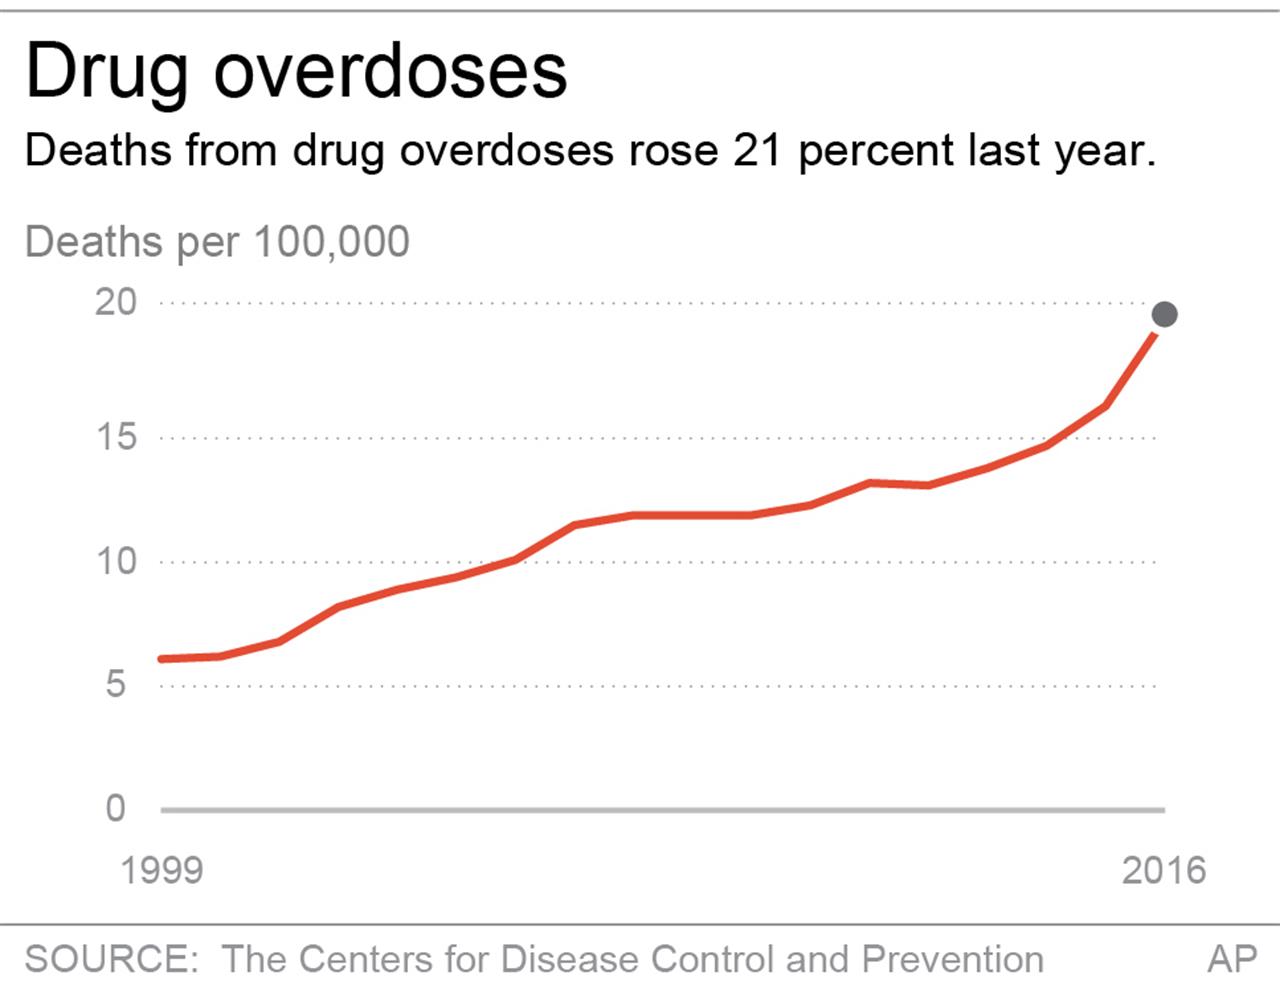 Soaring overdose deaths cut US life expectancy for 2nd year | 710 KNUS - Denver, CO1280 x 992